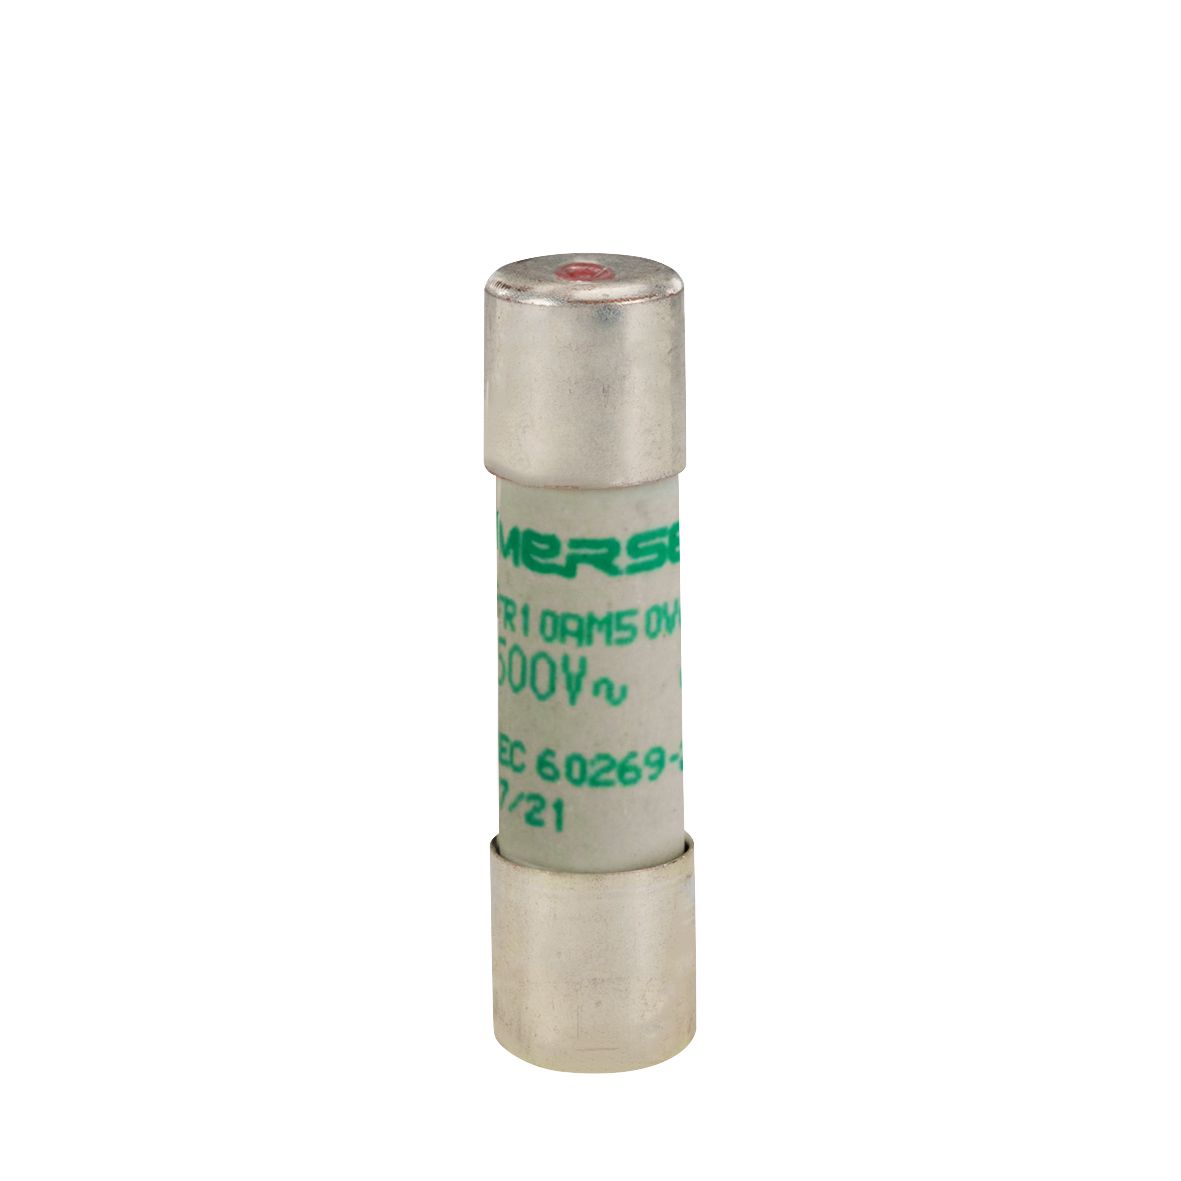 D214110 - Cylindrical fuse-link aM 500VAC 10.3x38, 12A with indicator